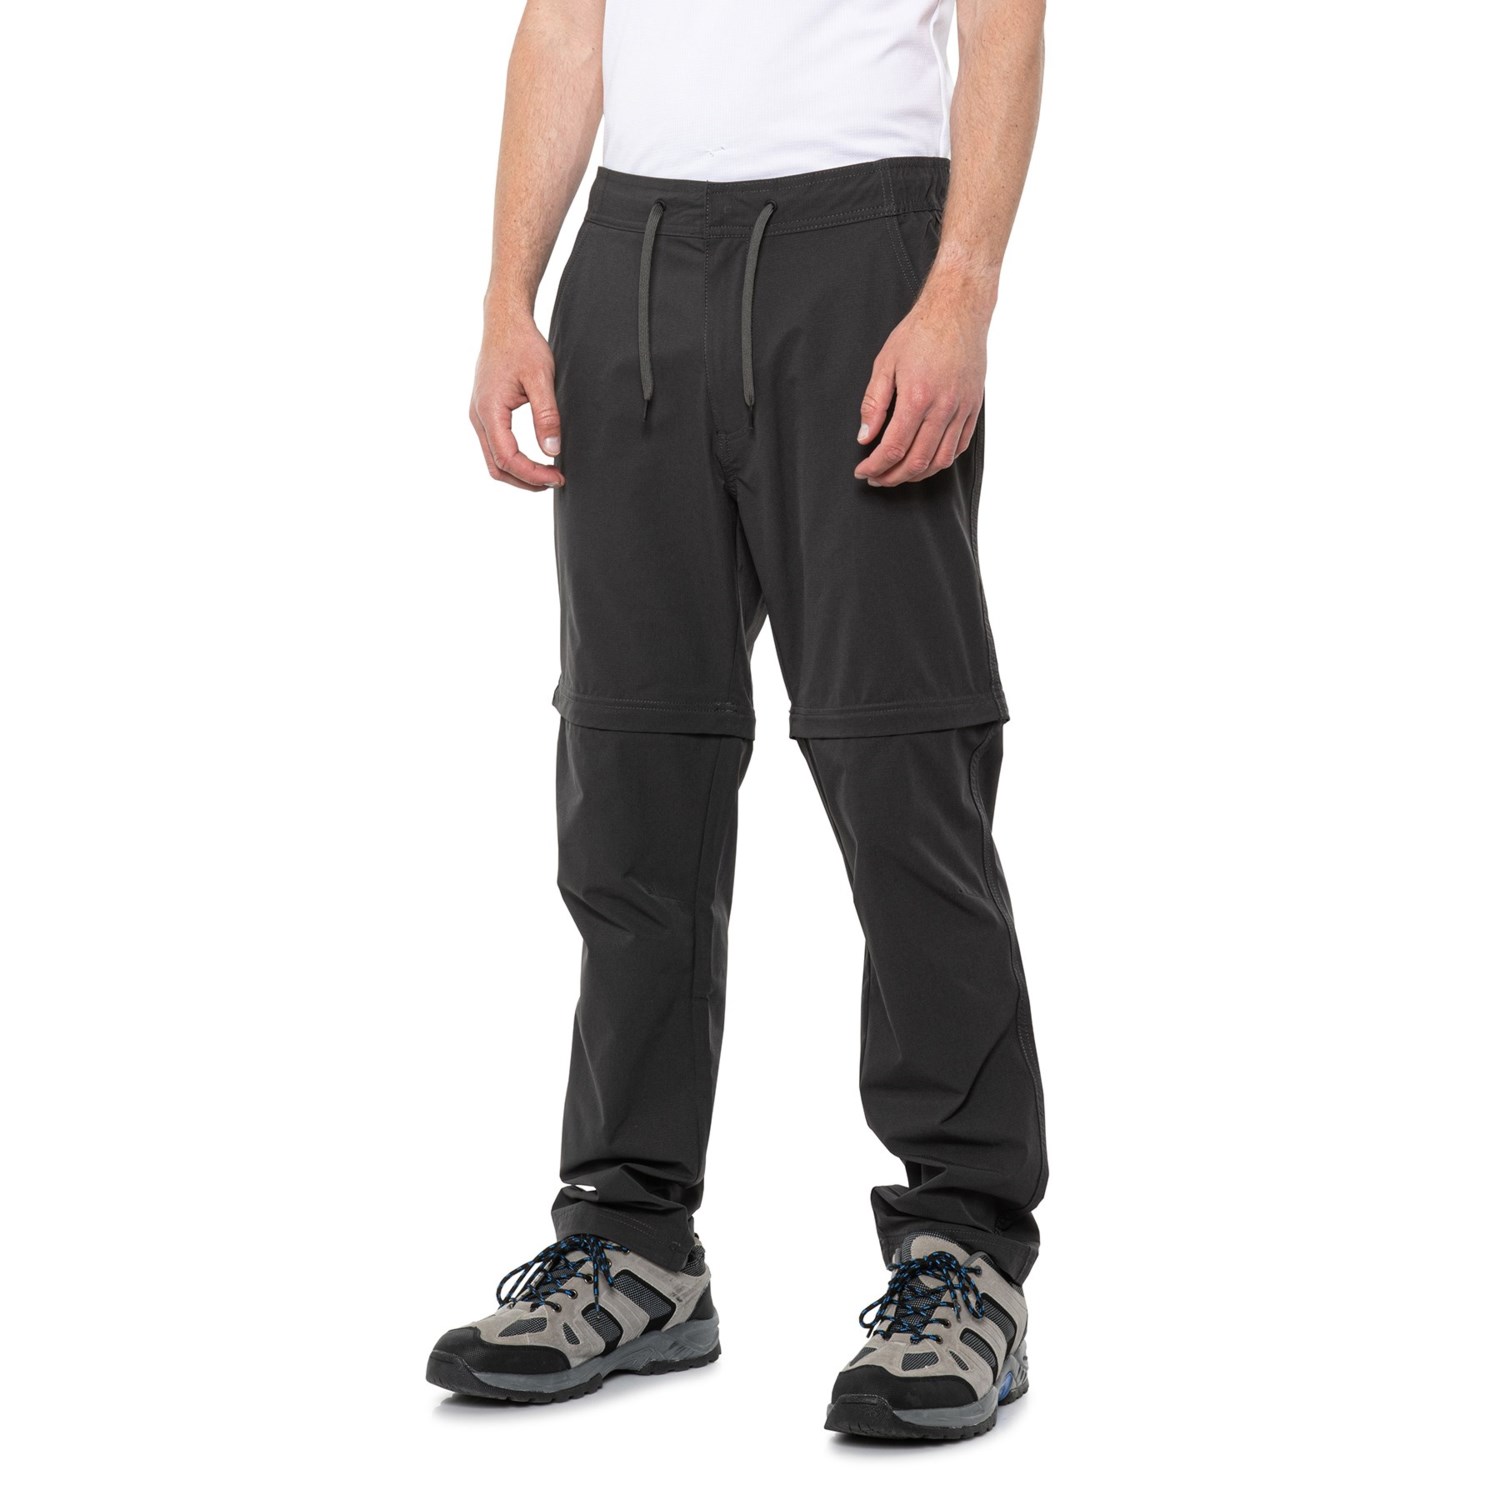 American Outdoorsman Convertible Stretch Ripstop Pants (For Men) - Save 70%